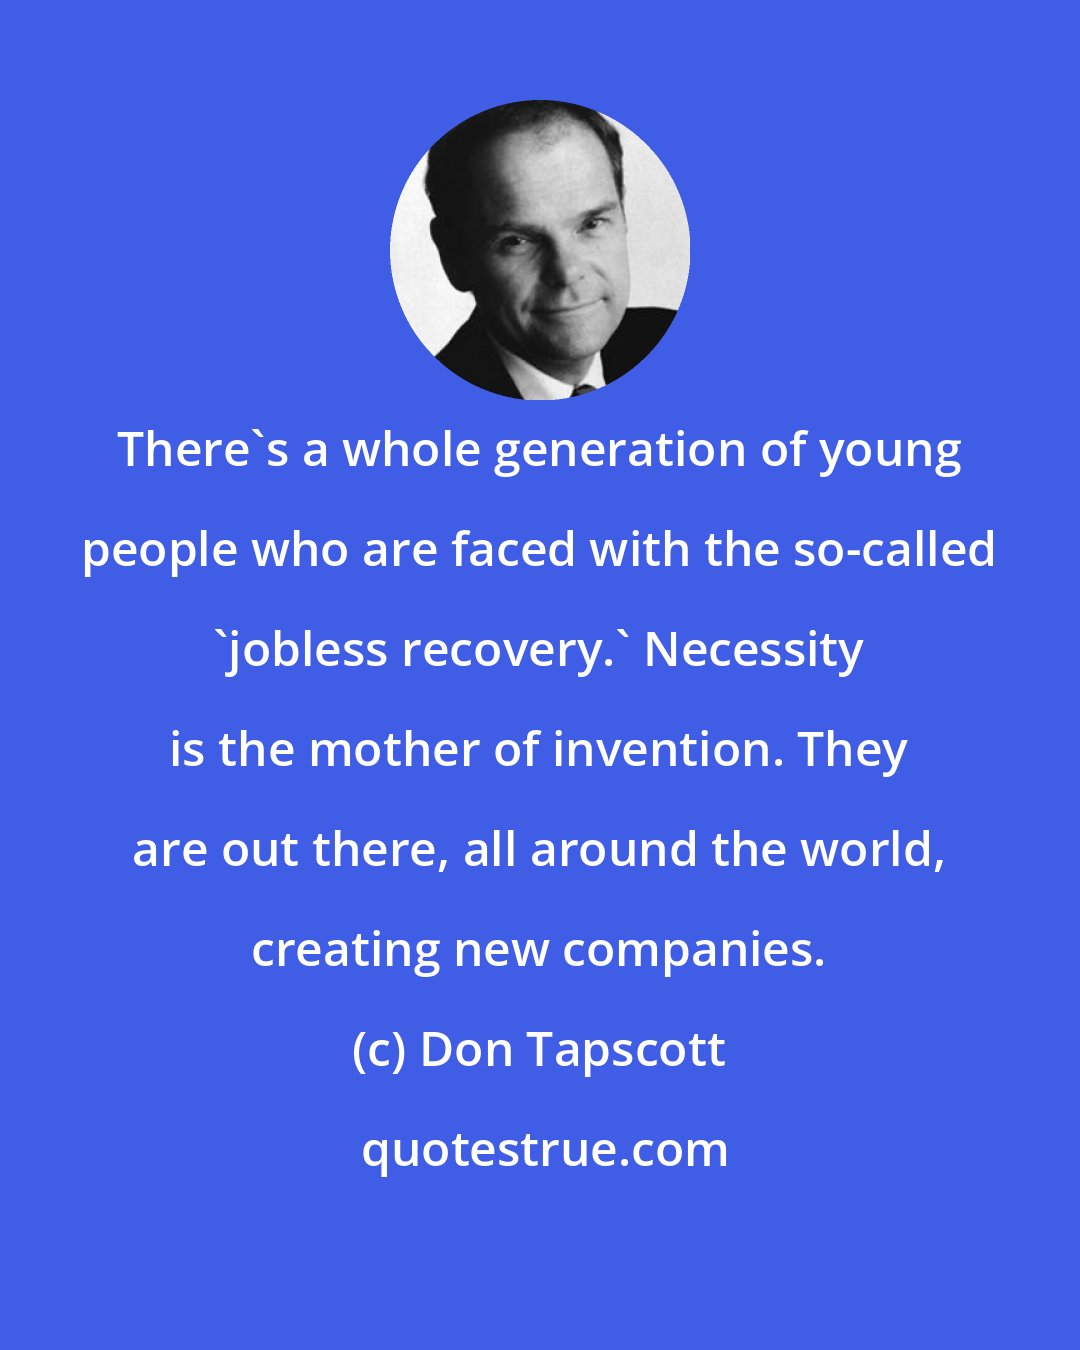 Don Tapscott: There's a whole generation of young people who are faced with the so-called 'jobless recovery.' Necessity is the mother of invention. They are out there, all around the world, creating new companies.